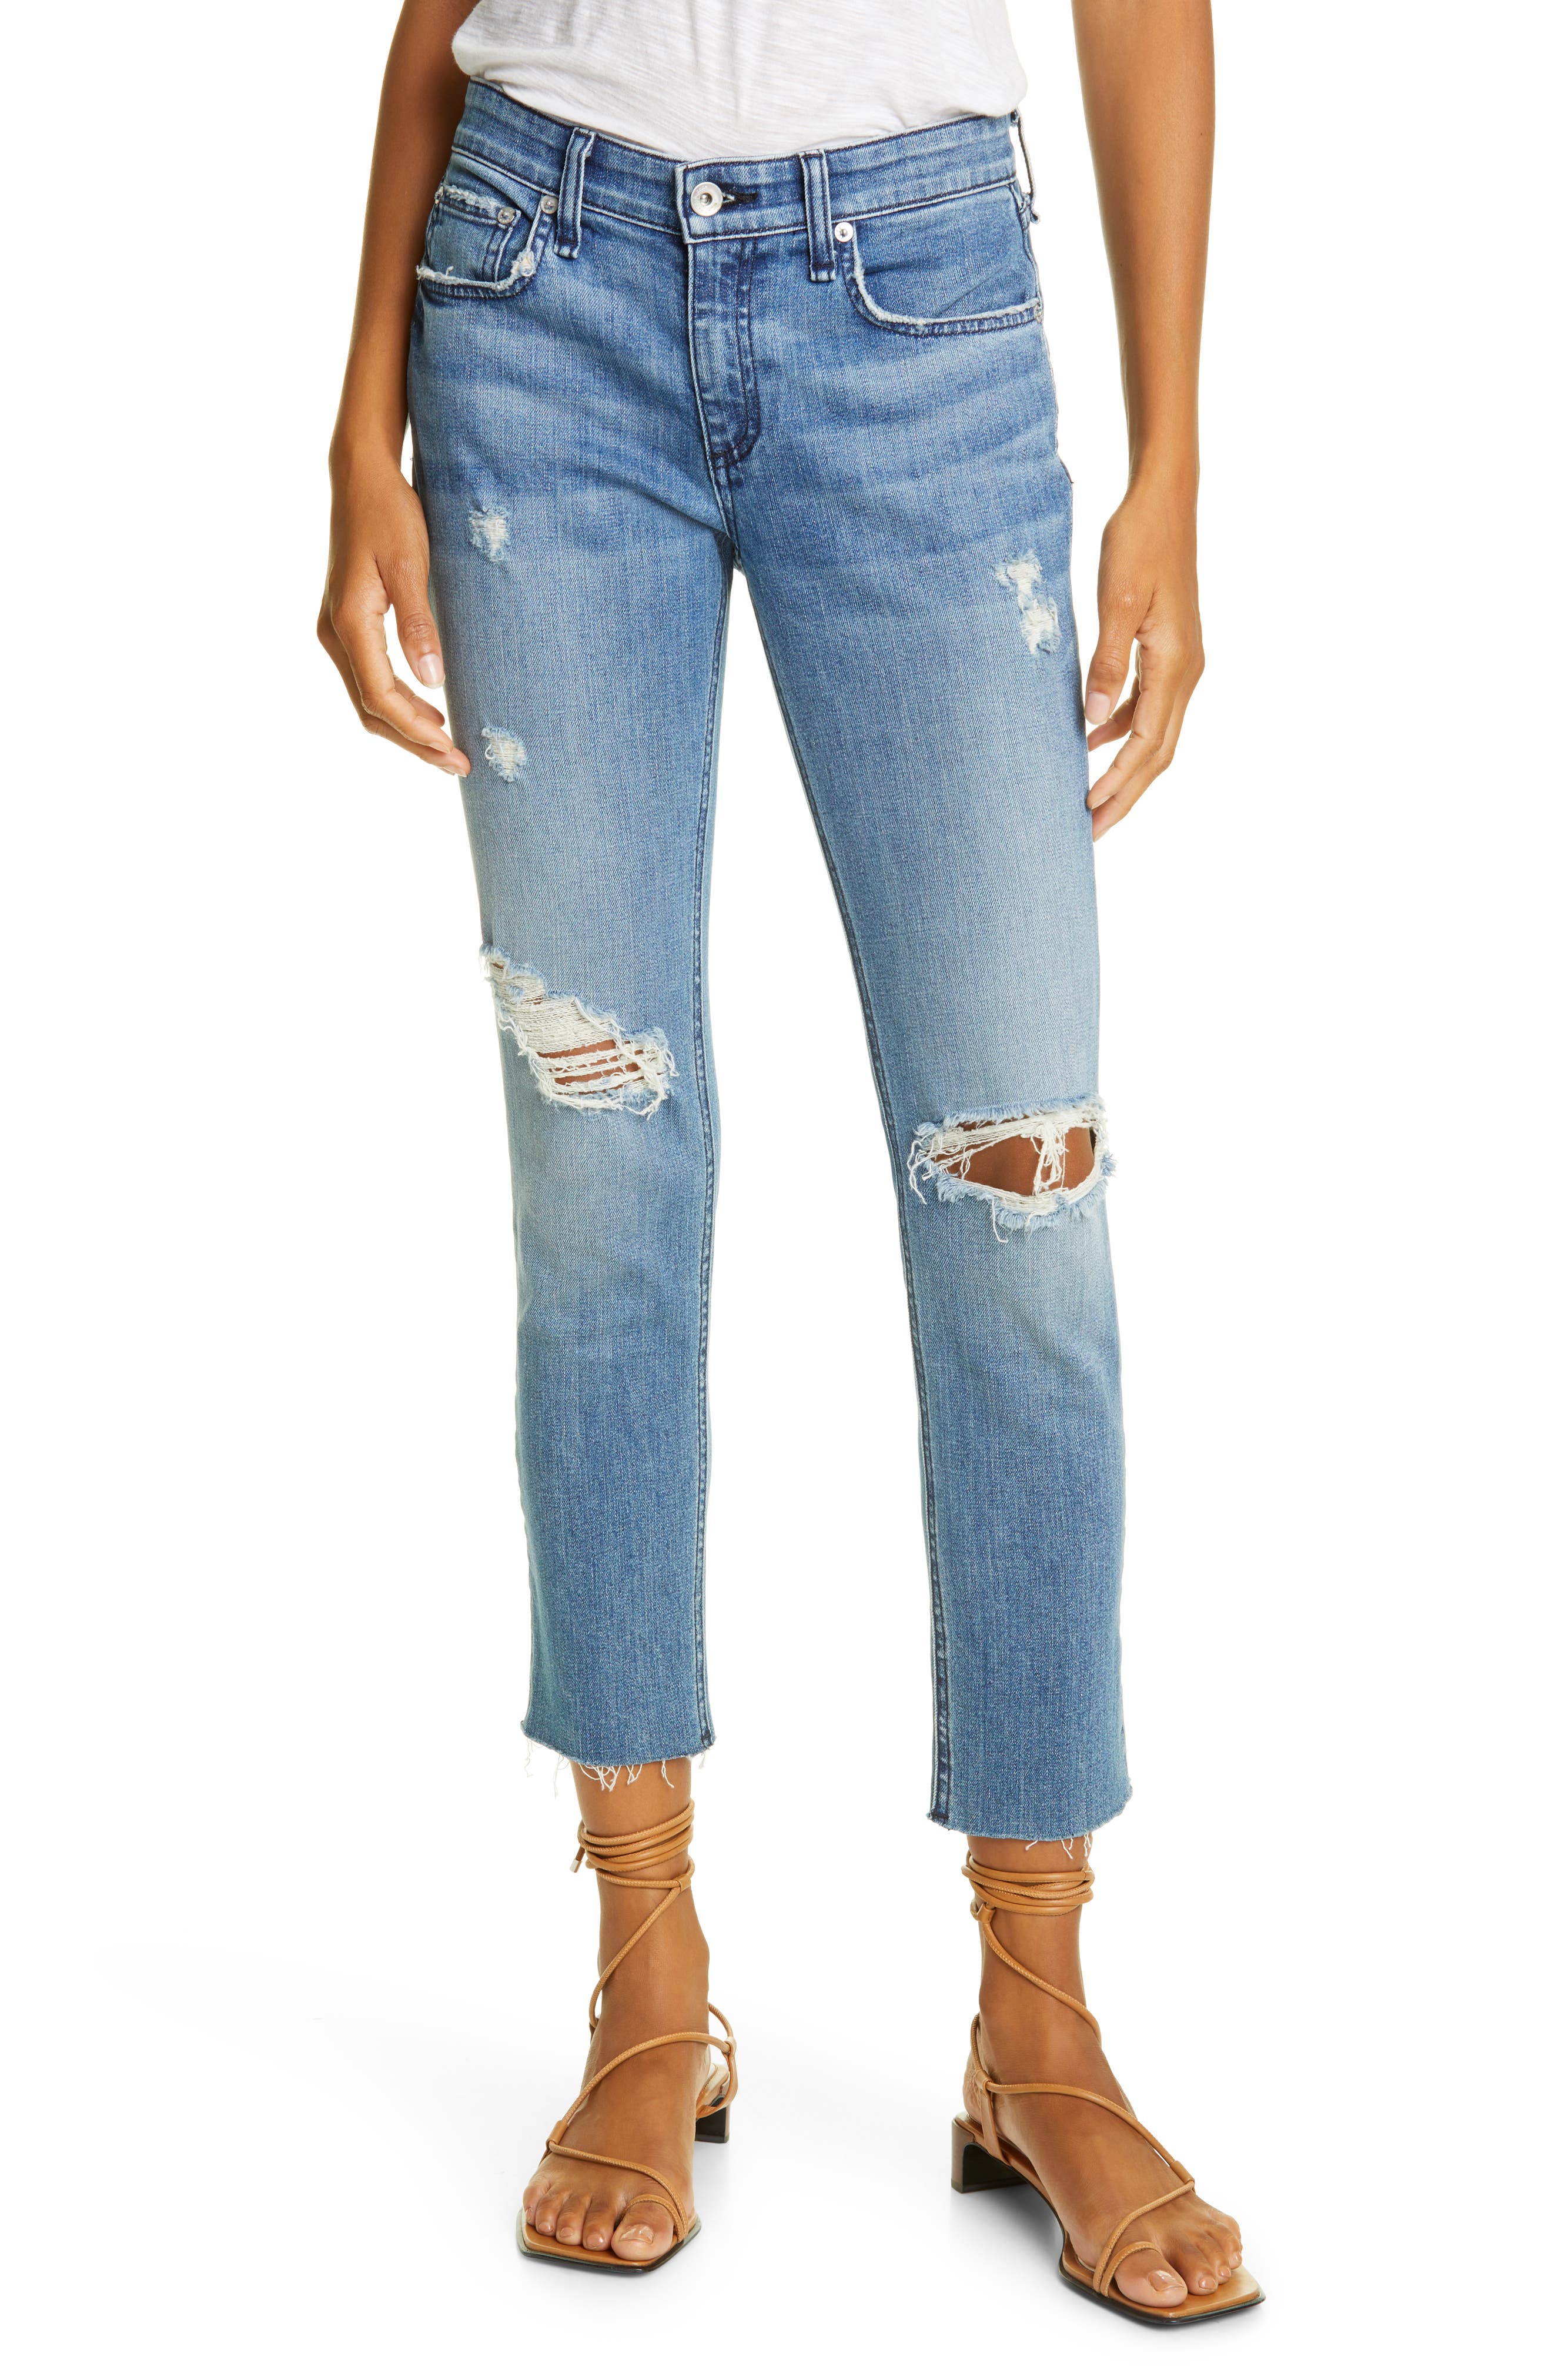 women's jeans online shopping lowest price